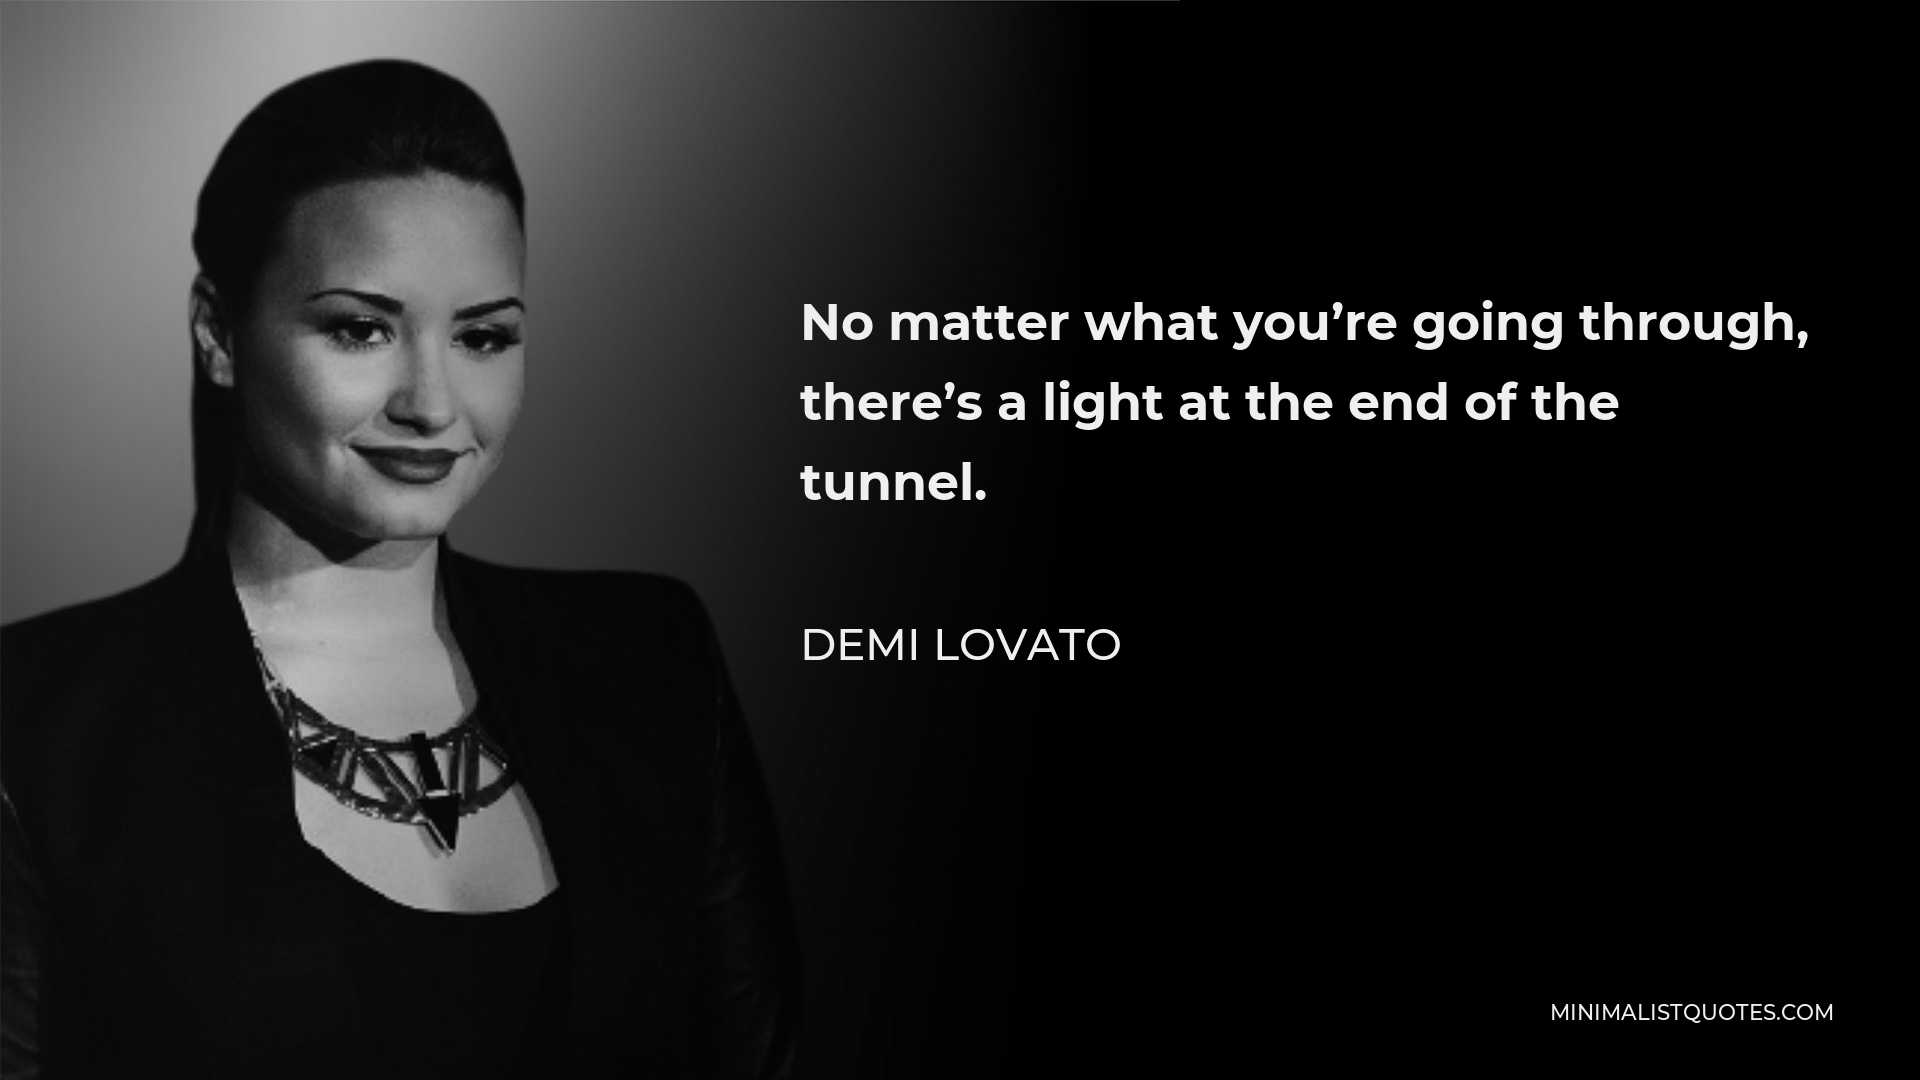 Demi Lovato Quote - No matter what you’re going through, there’s a light at the end of the tunnel.